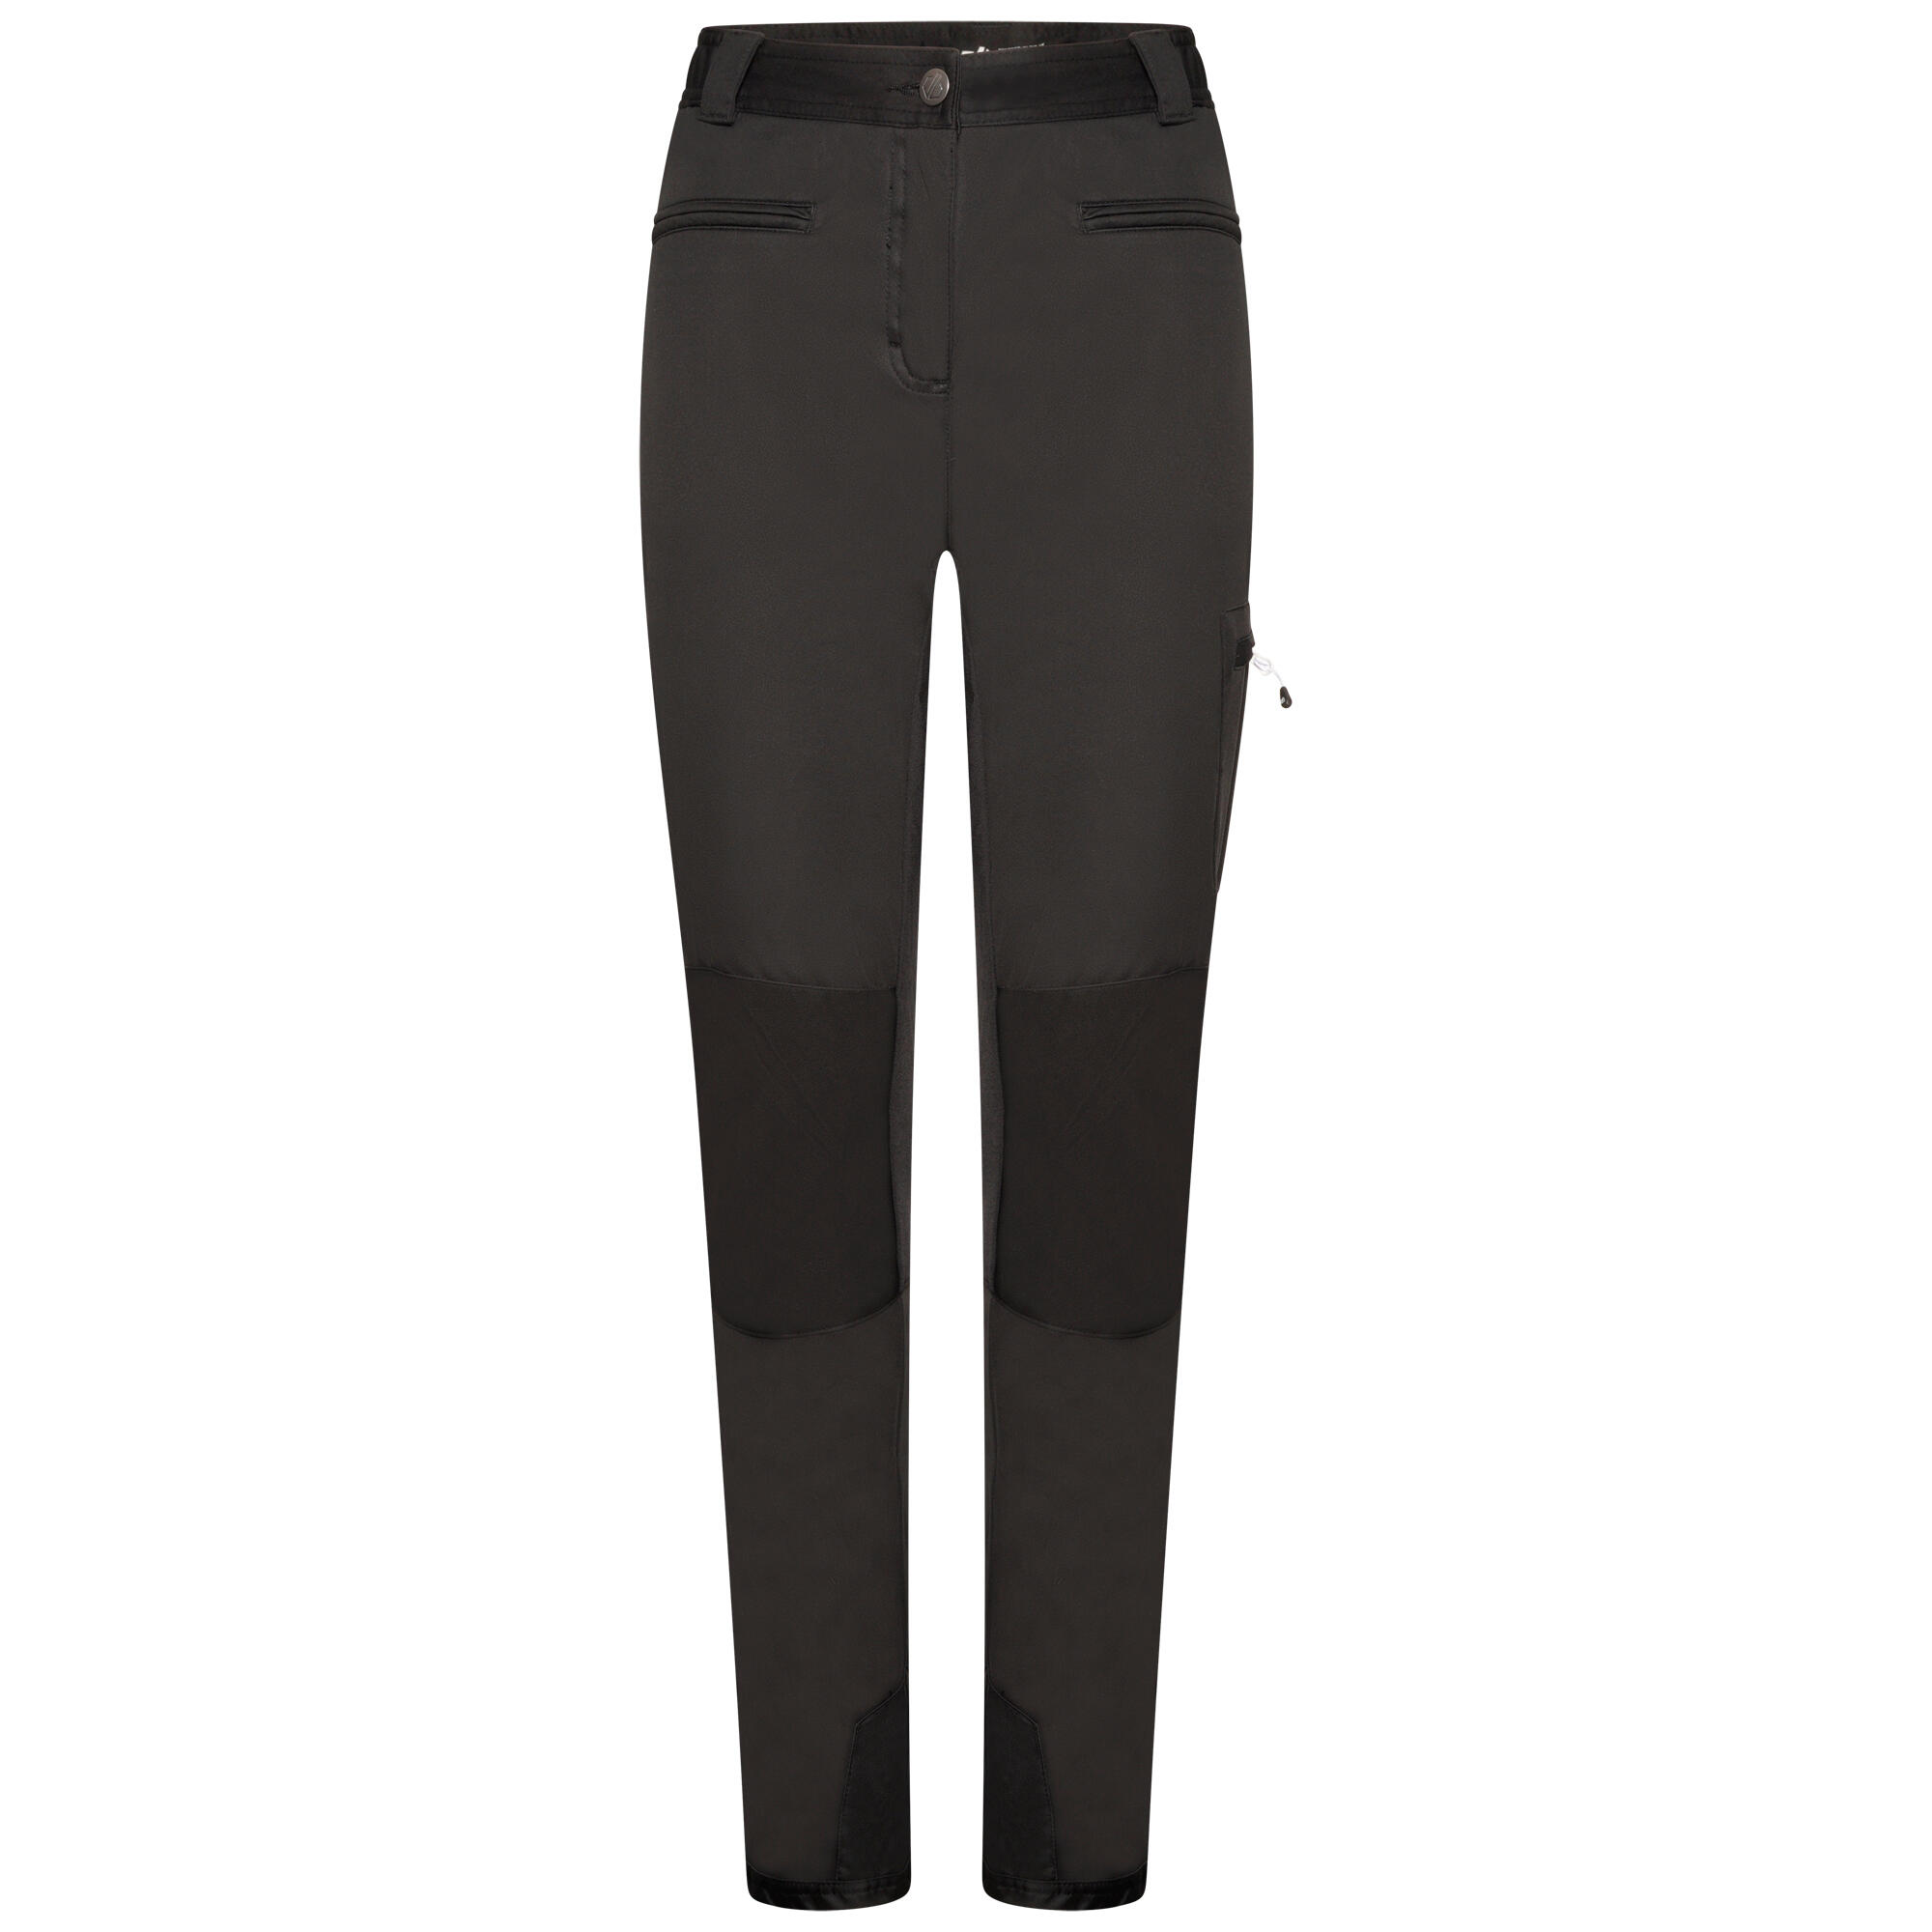 Appended II Women's Hiking Trousers - Black 1/7